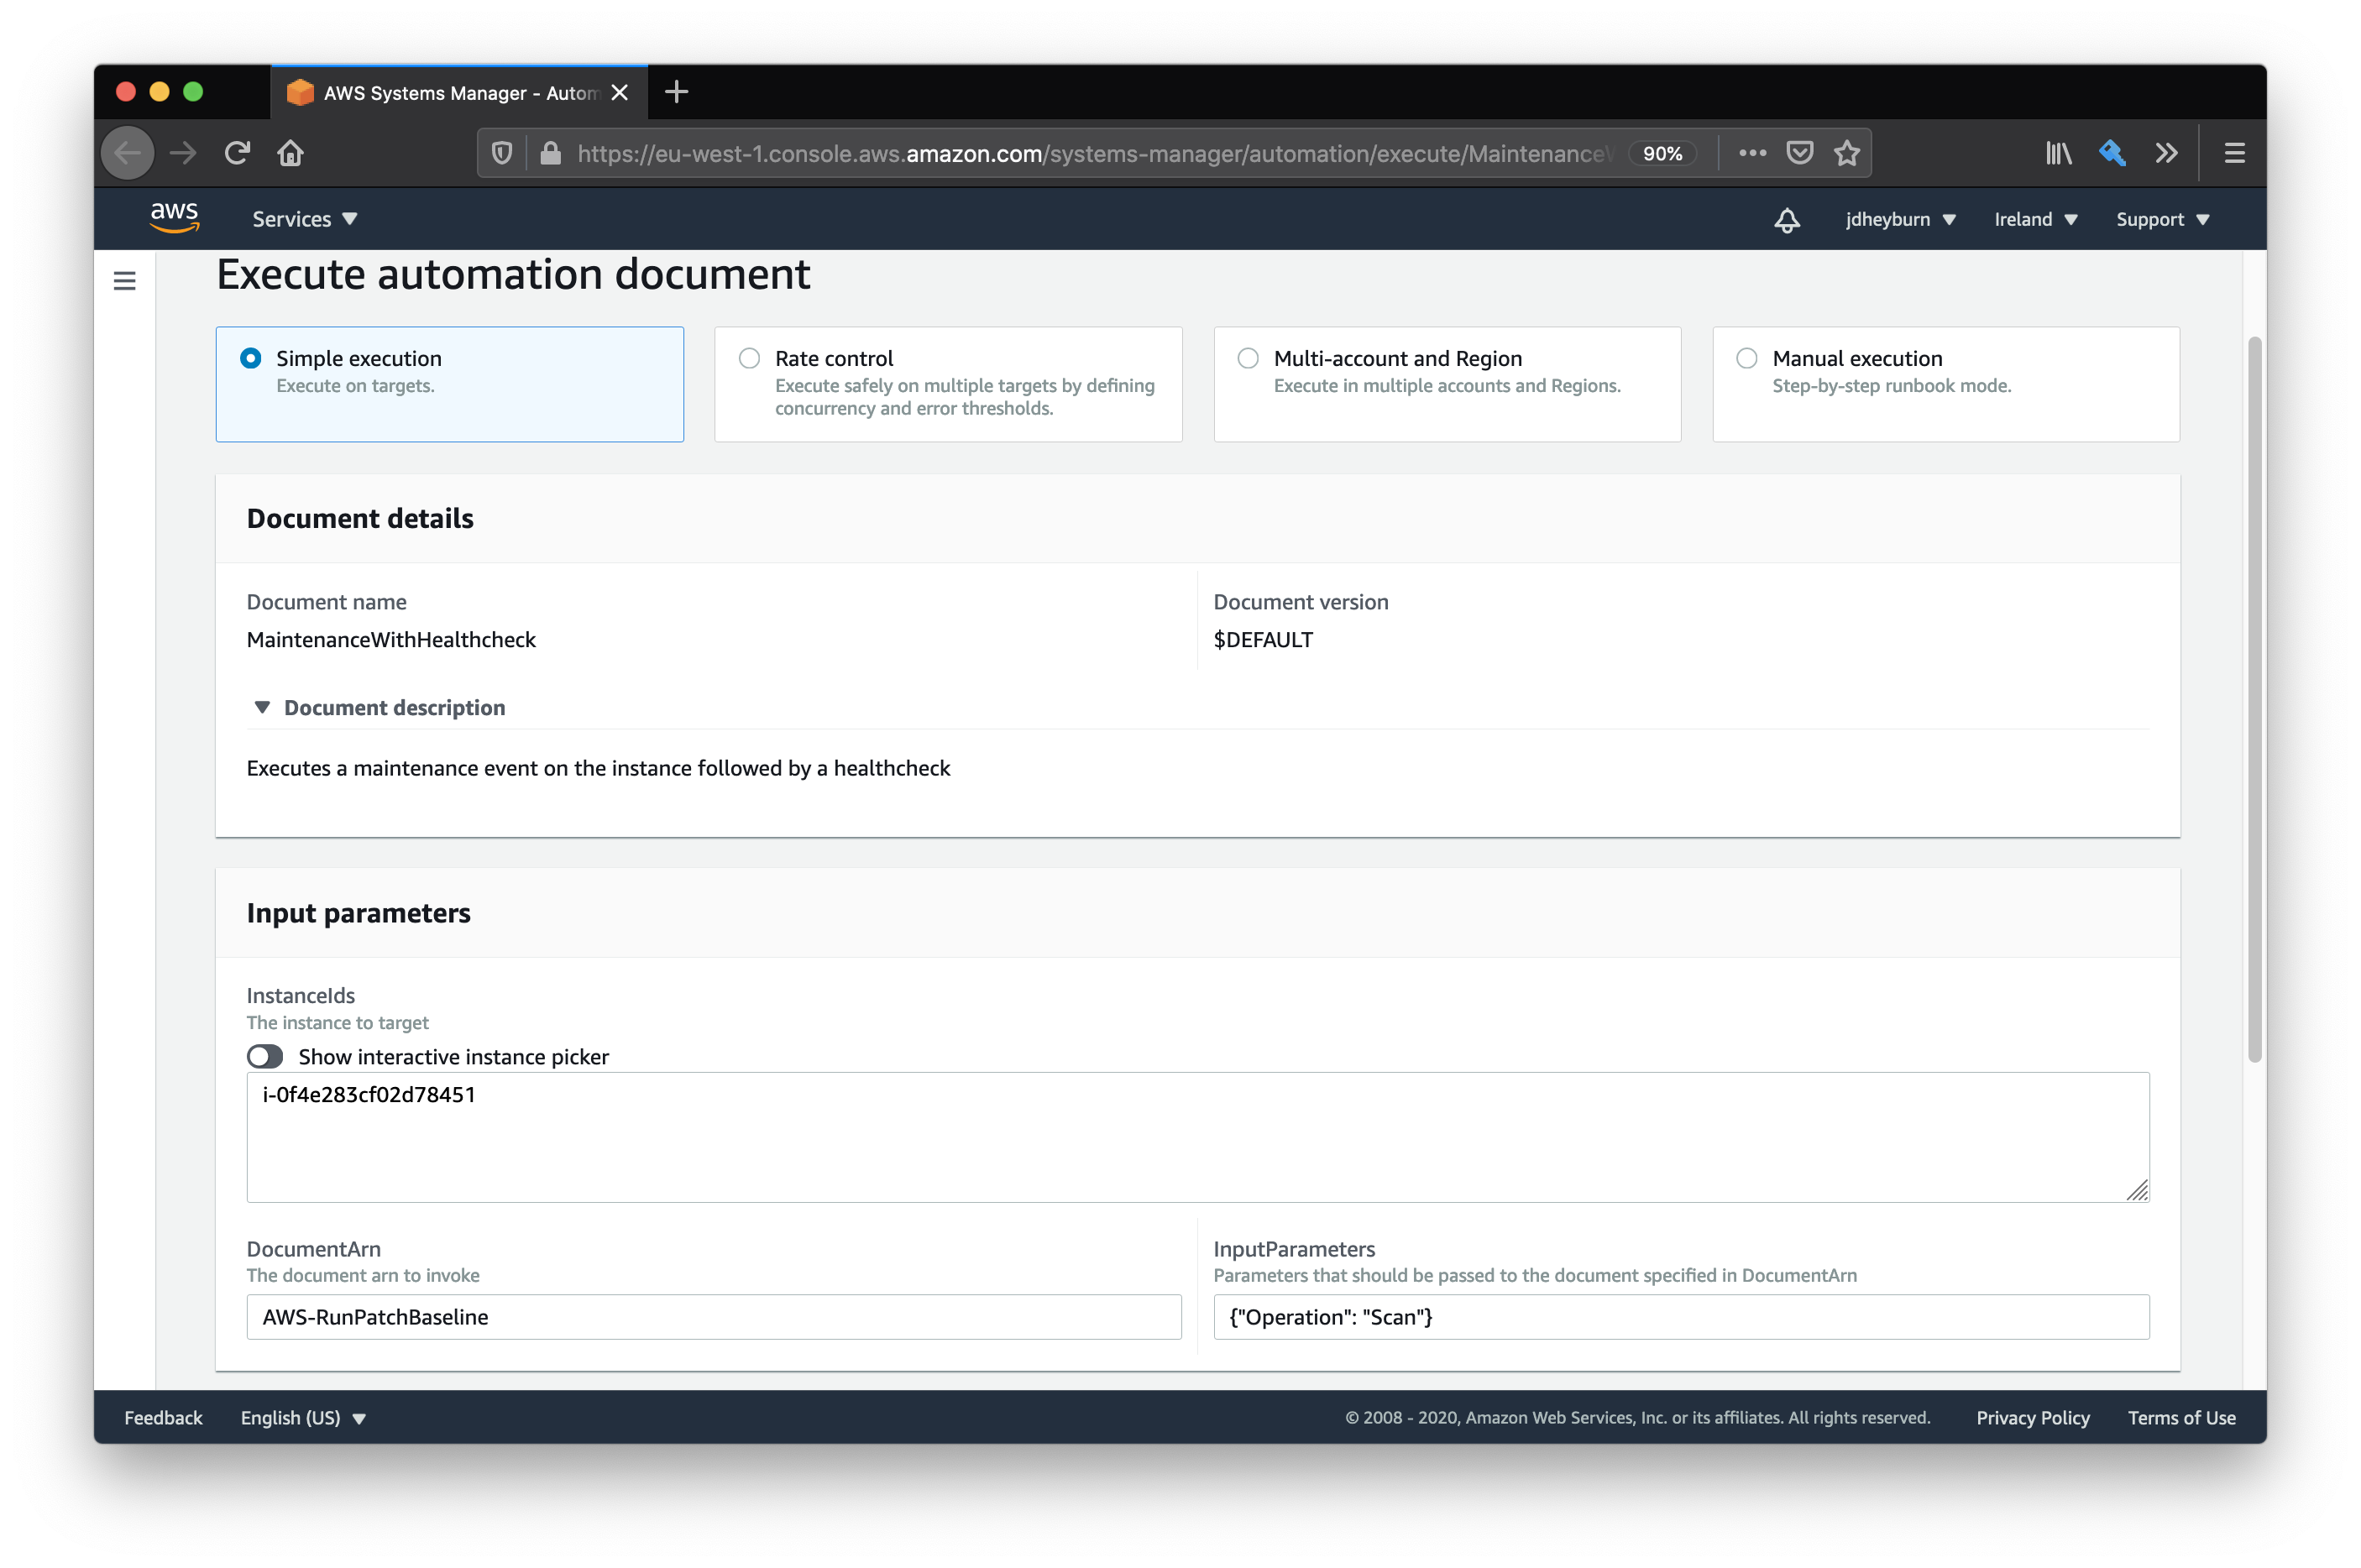 The setup page for the maintenance wrapper document, we're specifying in the text field the command document to invoke, which is AWS-RunPatchBaseline. We've also added in the parameters for the document to run under InputParameters